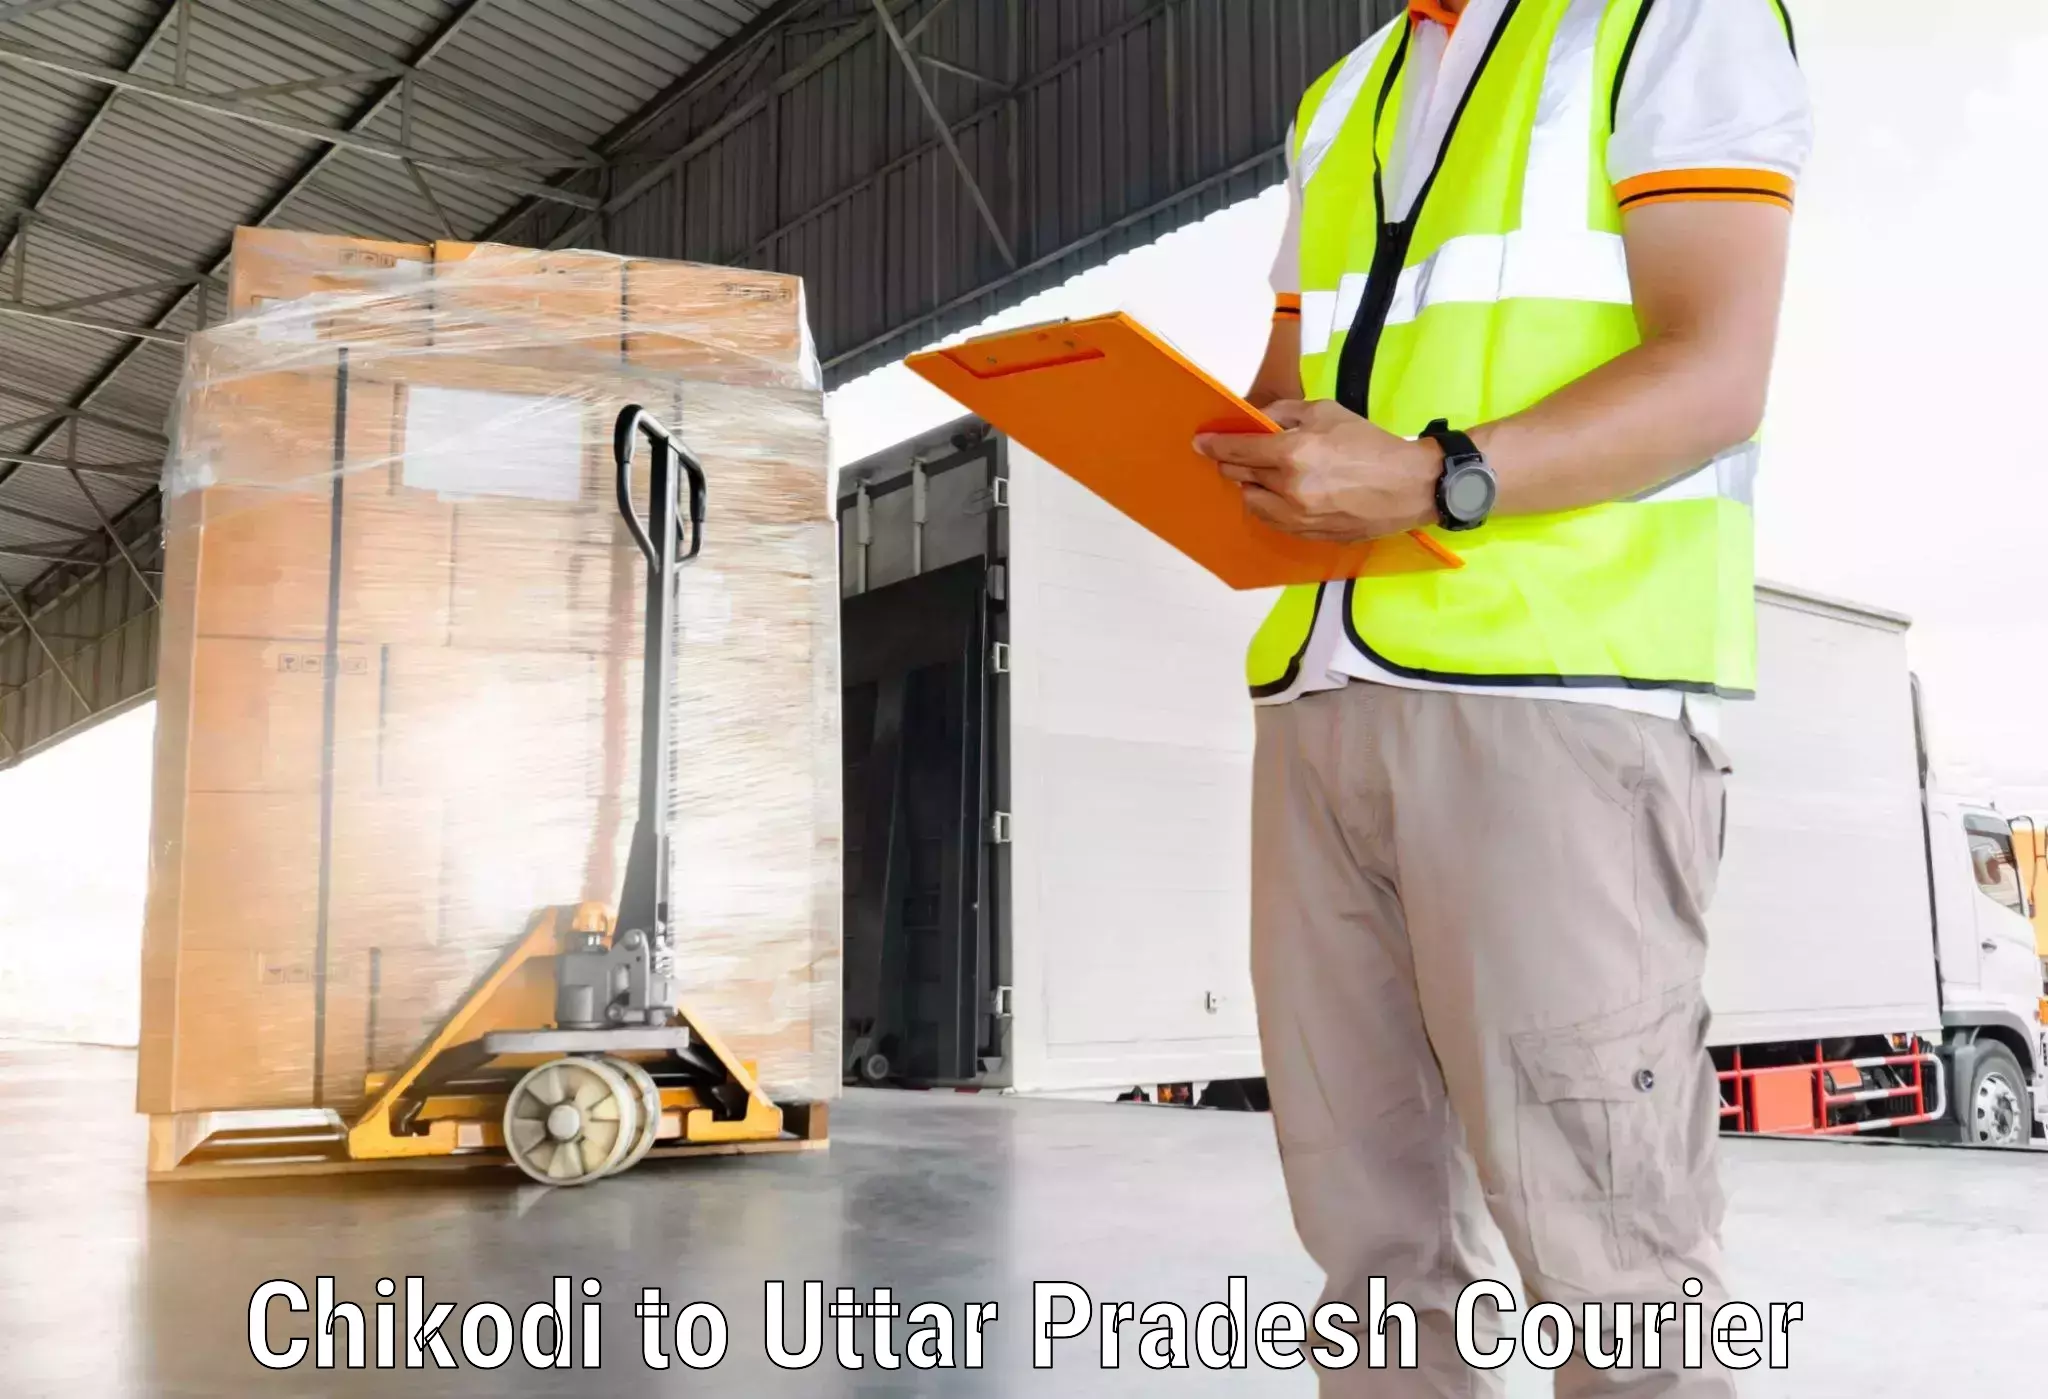 Global courier networks Chikodi to Chandwak